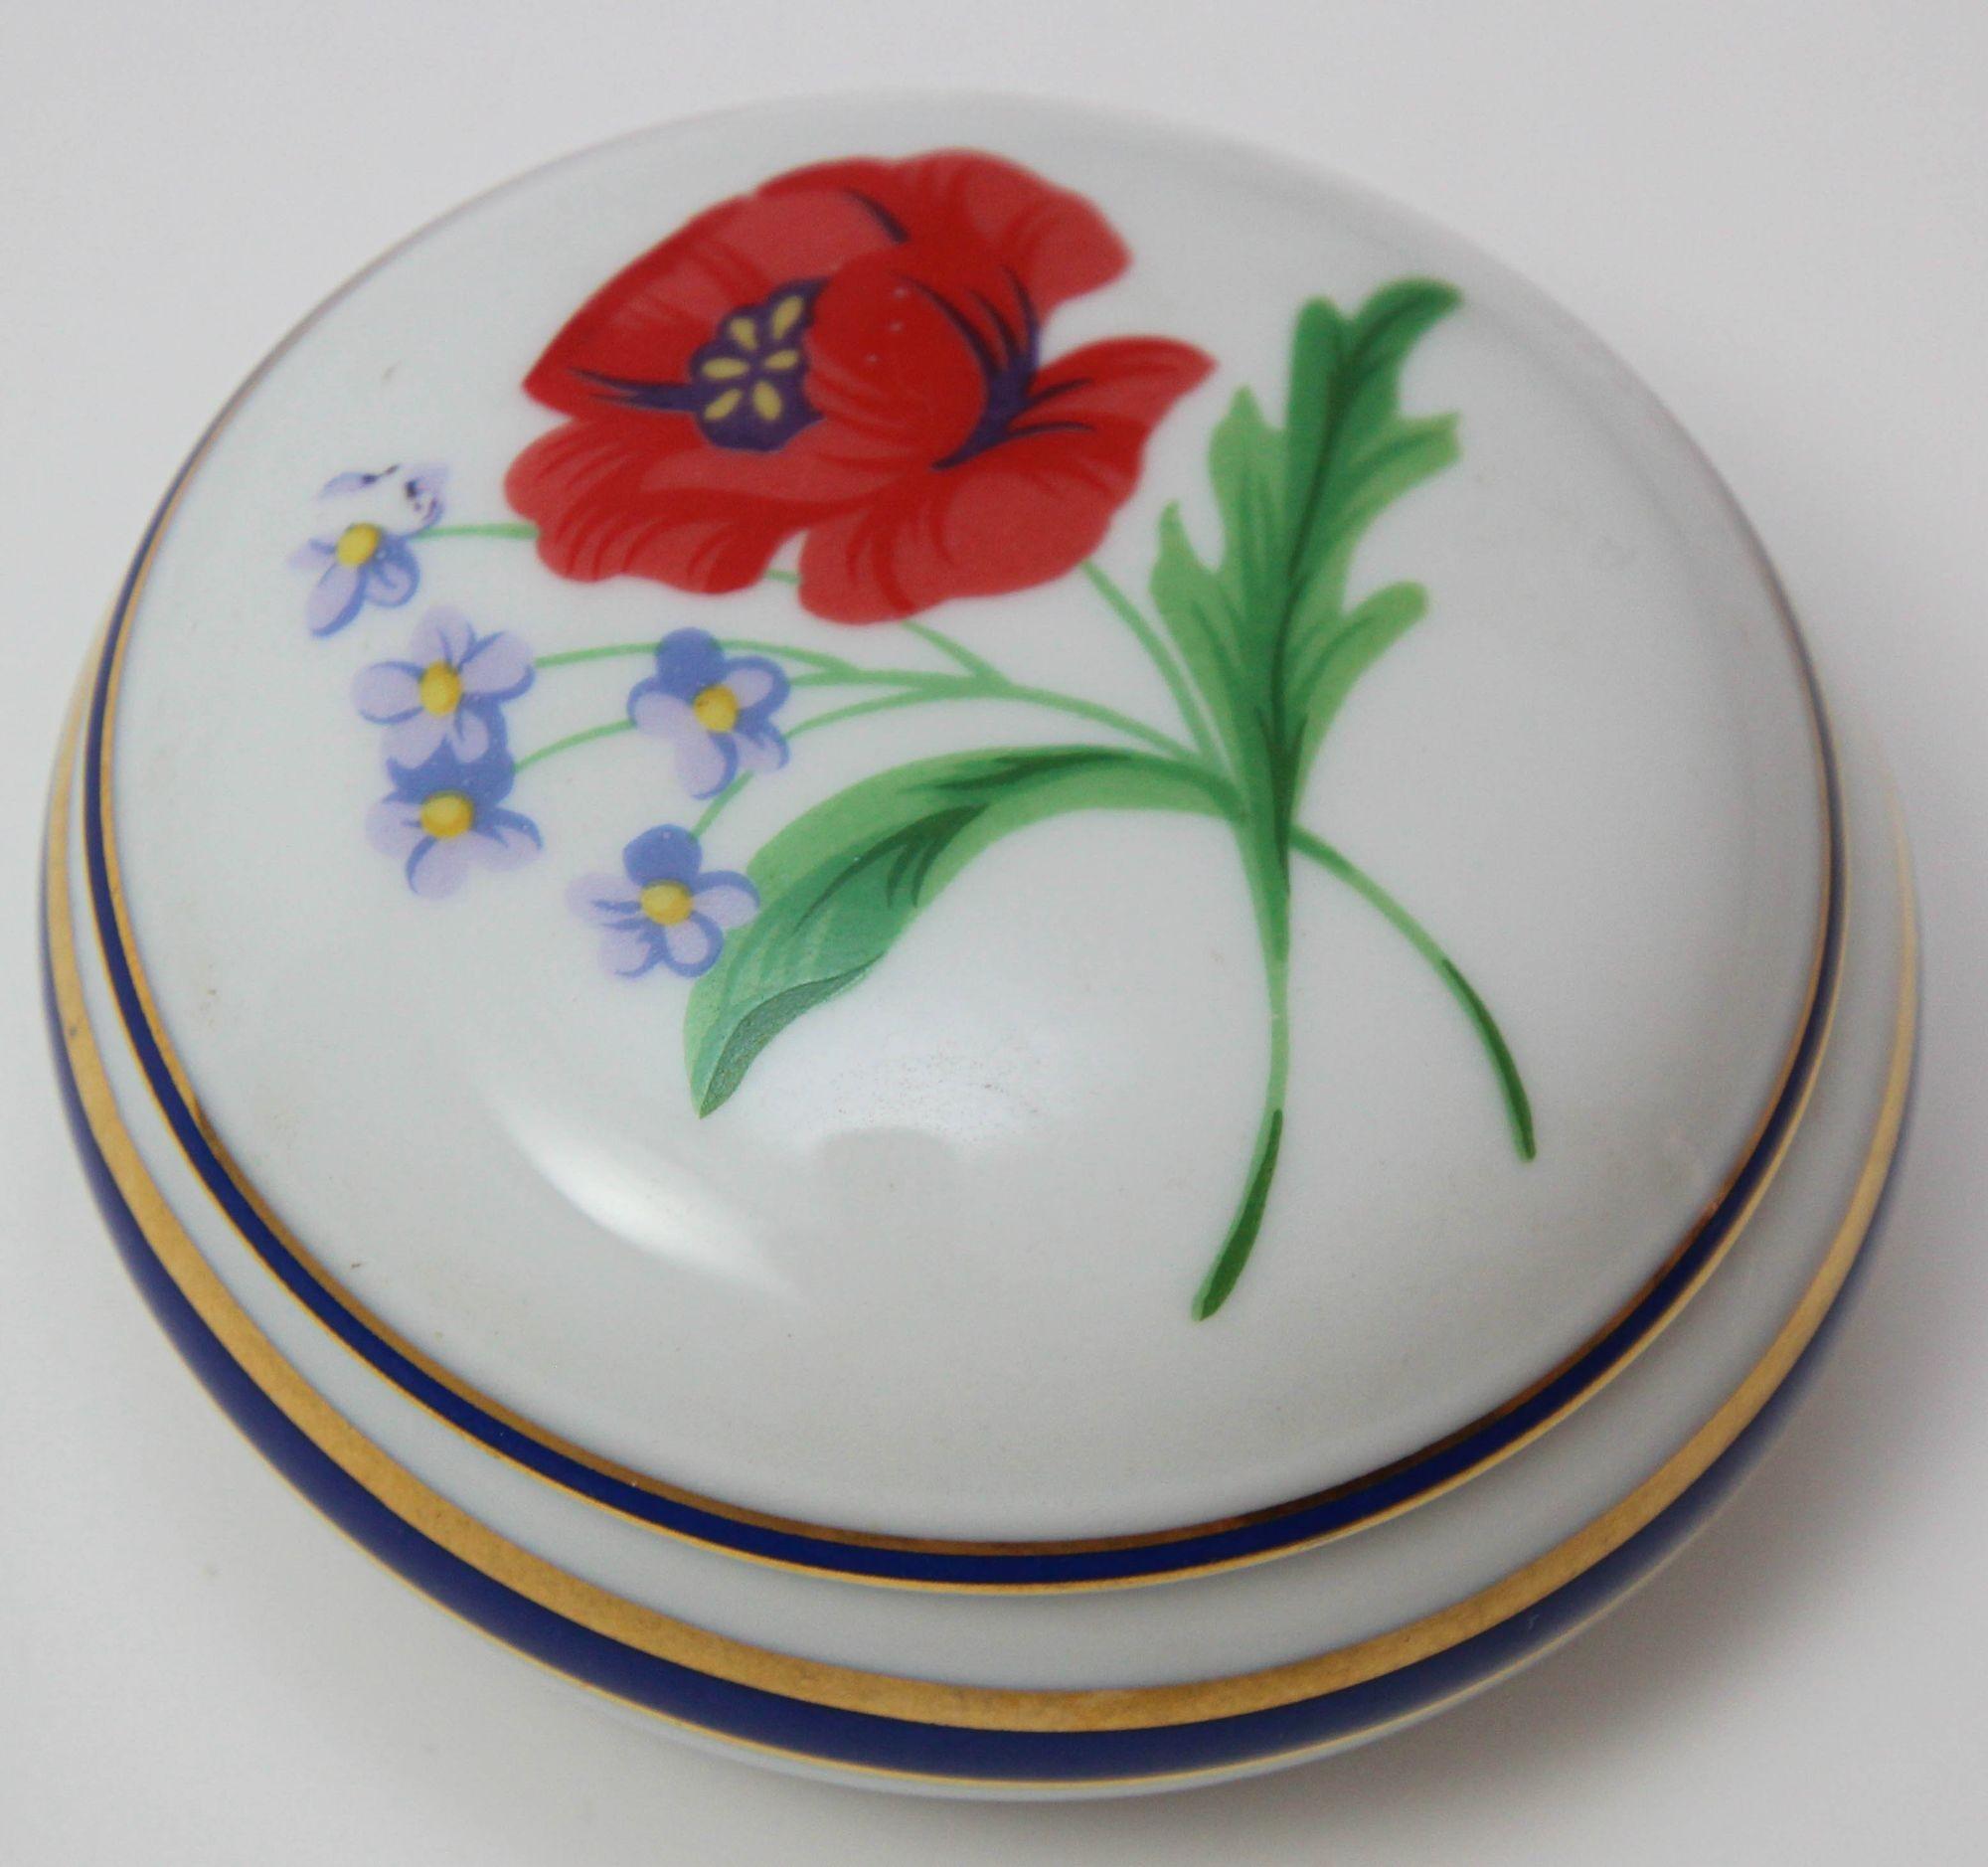 Tiffany & Co. Limoges France American Garden Round Porcelain Pill Box.
TIFFANY & CO. “American Garden” Round Collectible Porcelain Box made in Limoges, France.
Vintage Tiffany & Co. small round lidded trinket box in the 